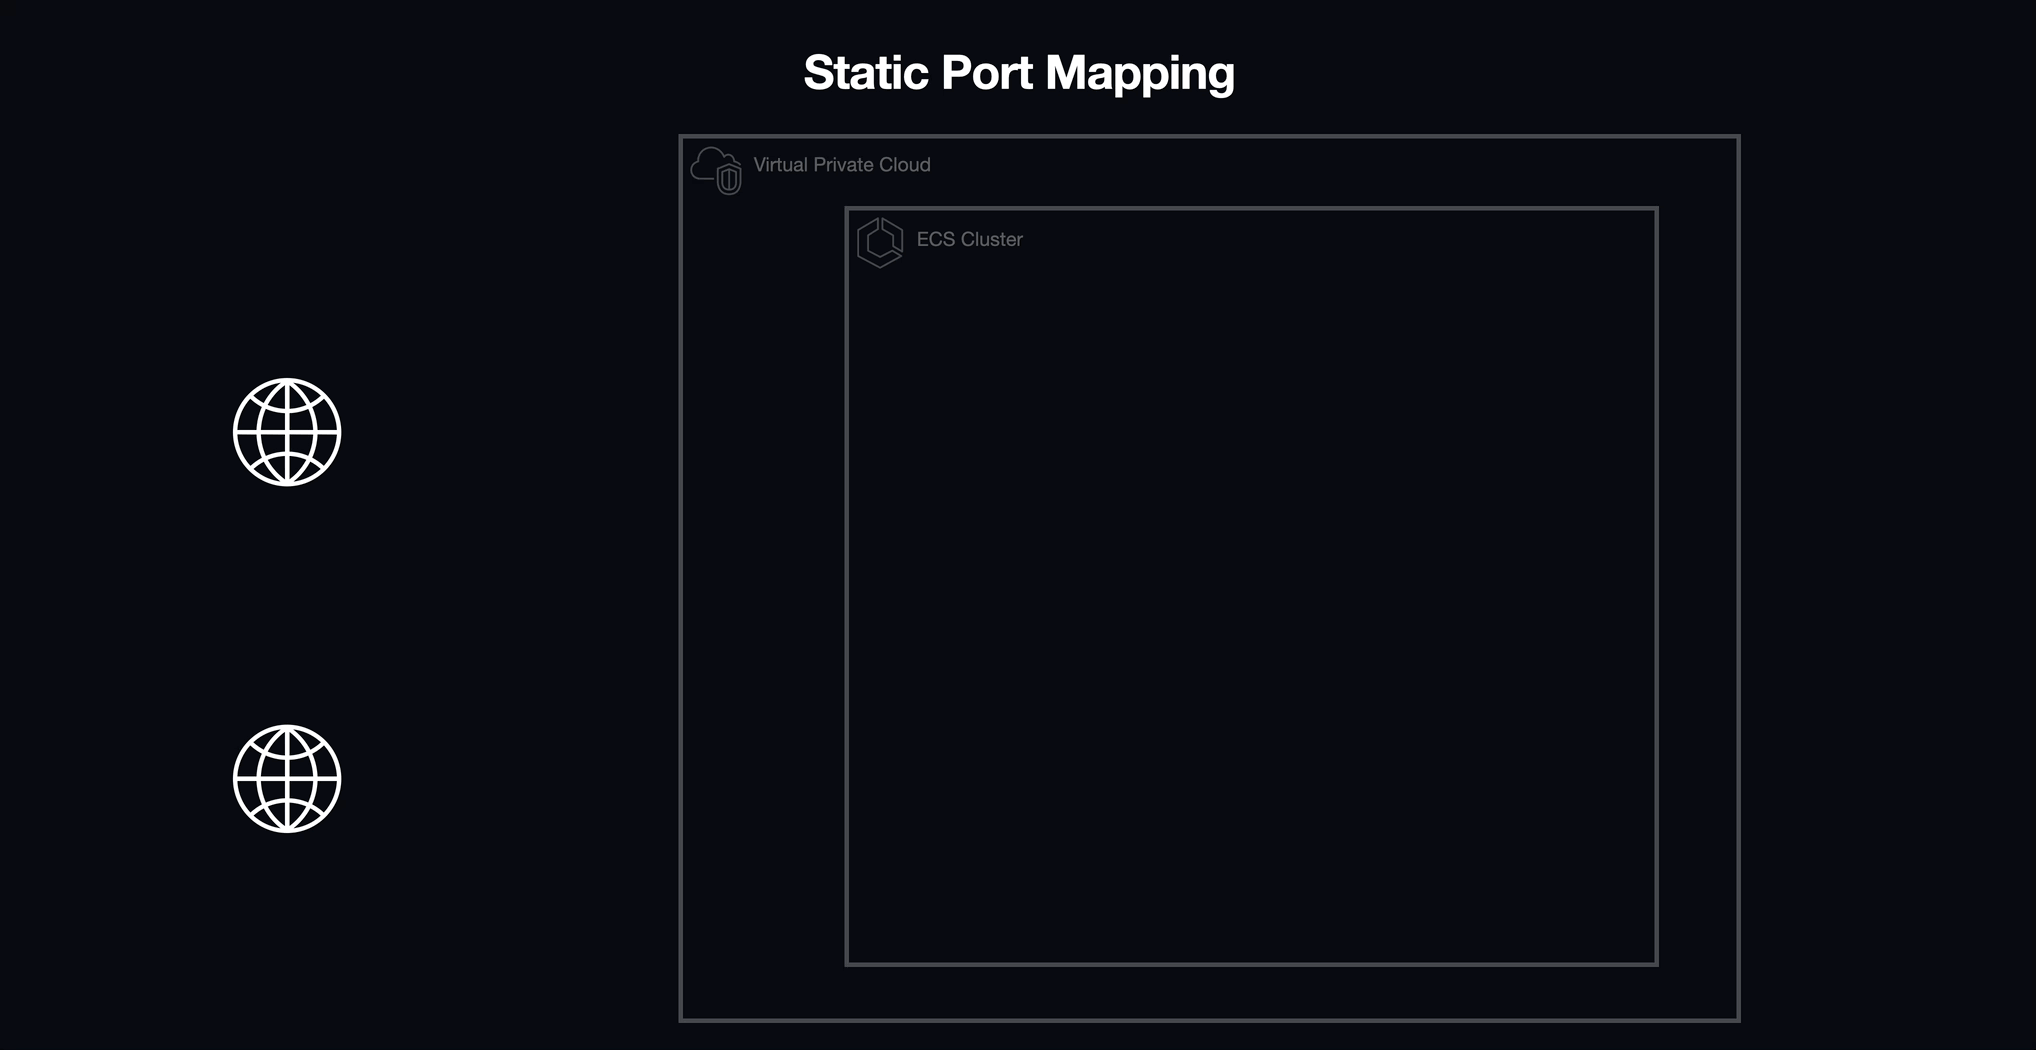 An animation representing representing static port mapping for a single container per EC2 instance.